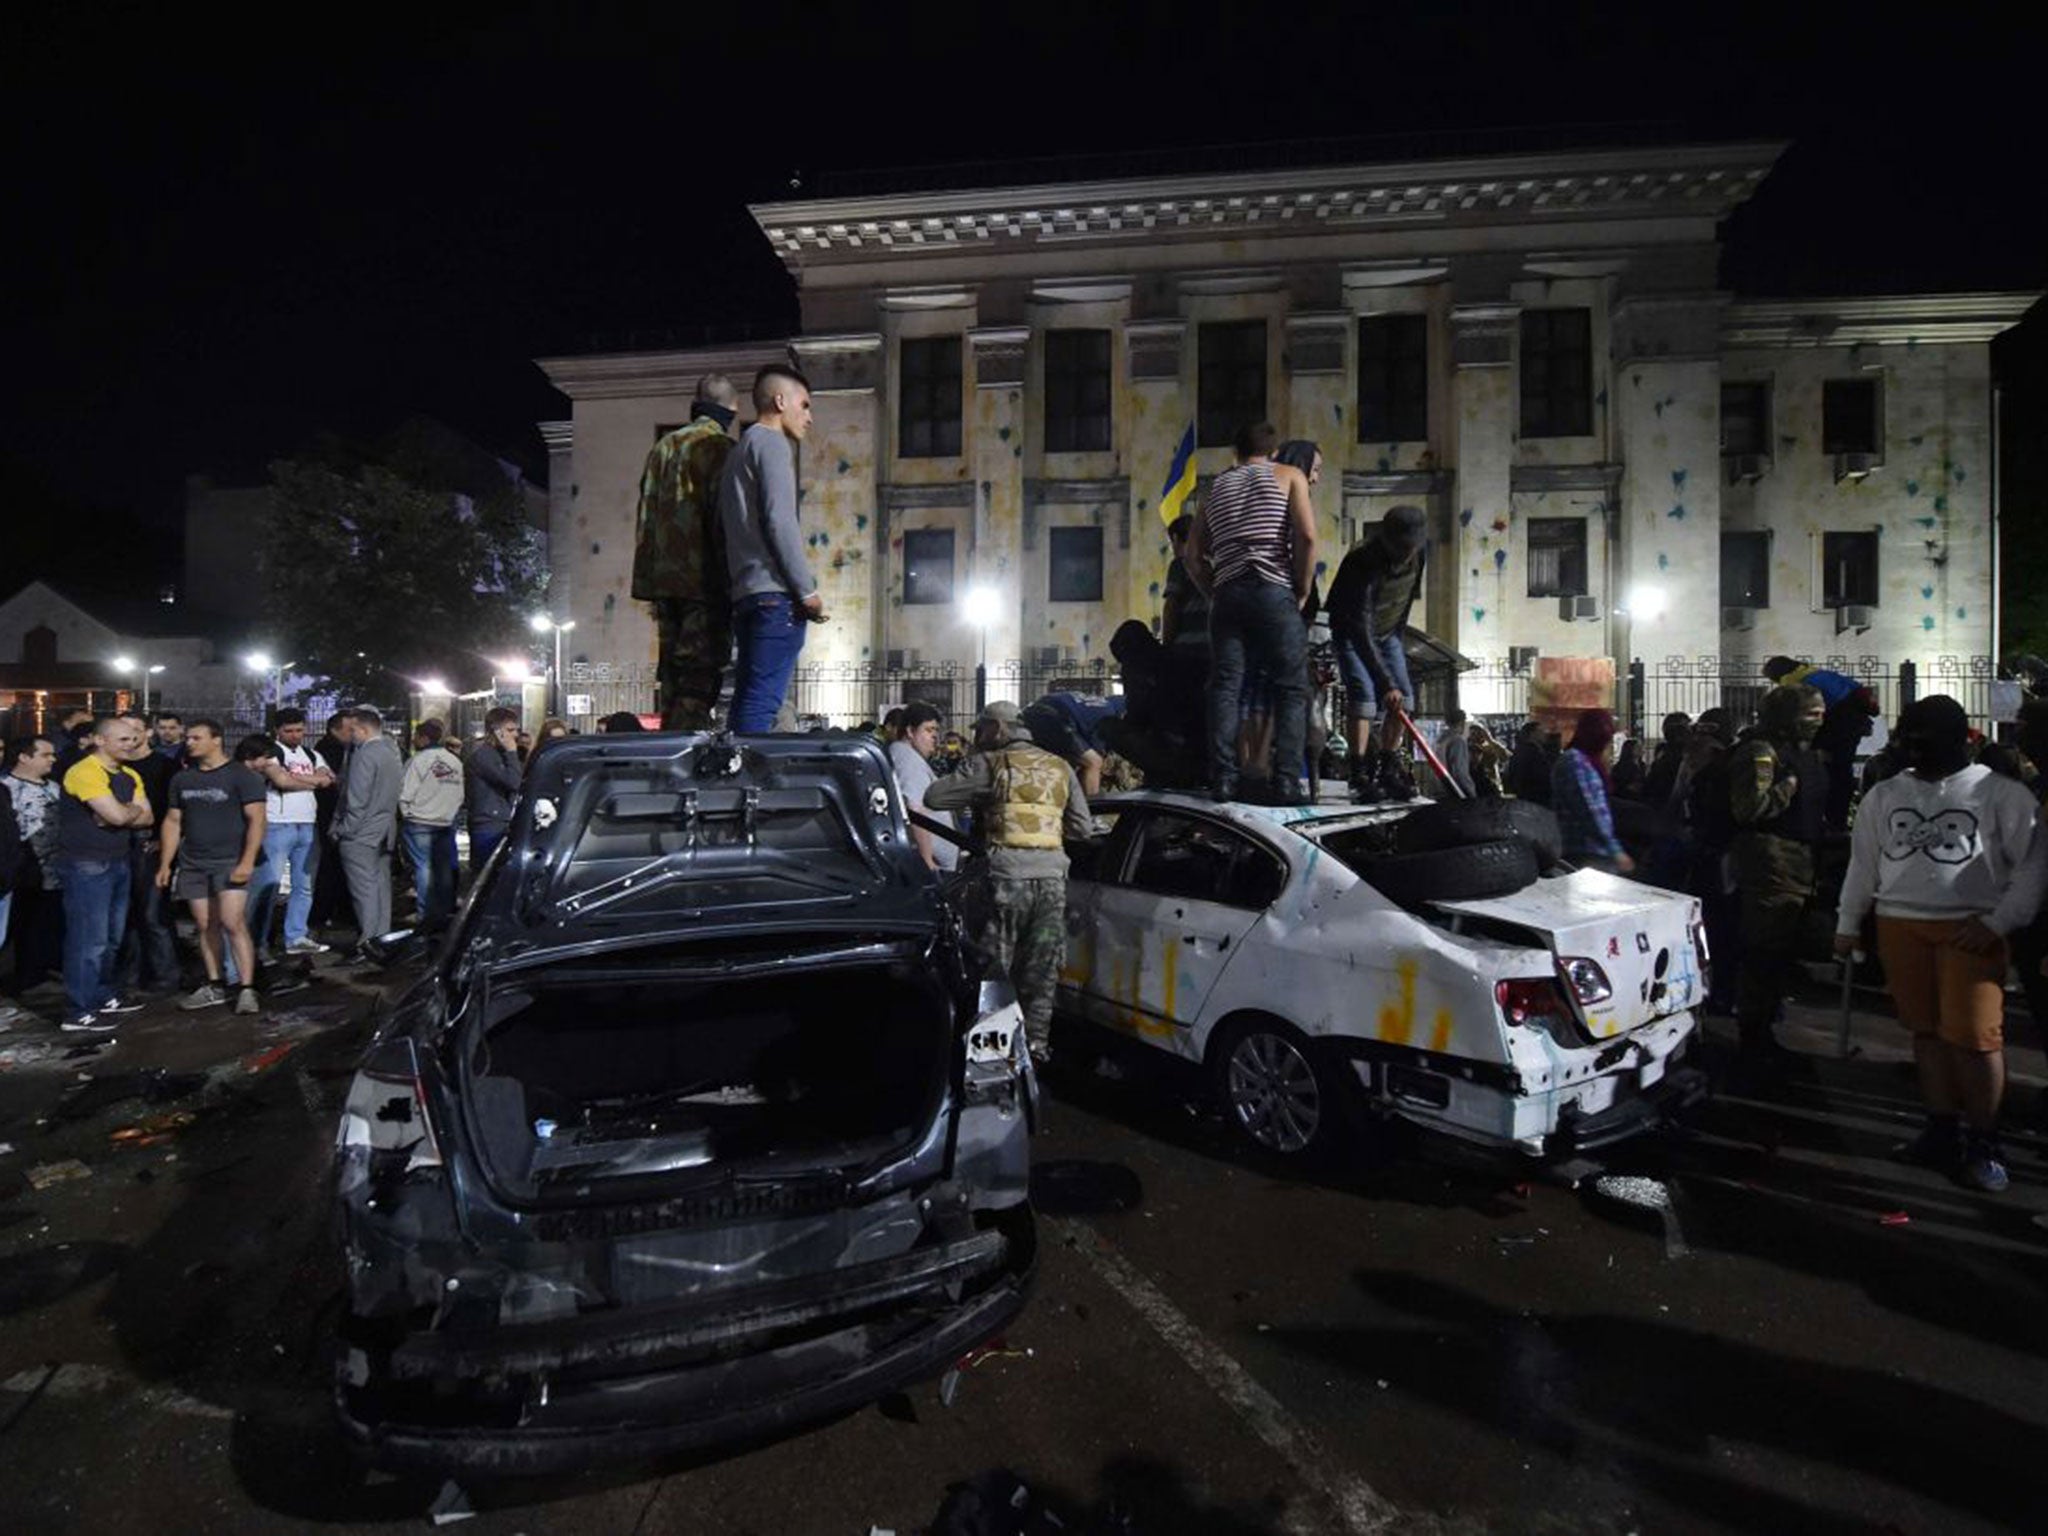 Demonstrators stand on top of crashed diplomatic cars during the protest in front of the Russian embassy in Kiev yesterday following the downing of a Ukrainian plane